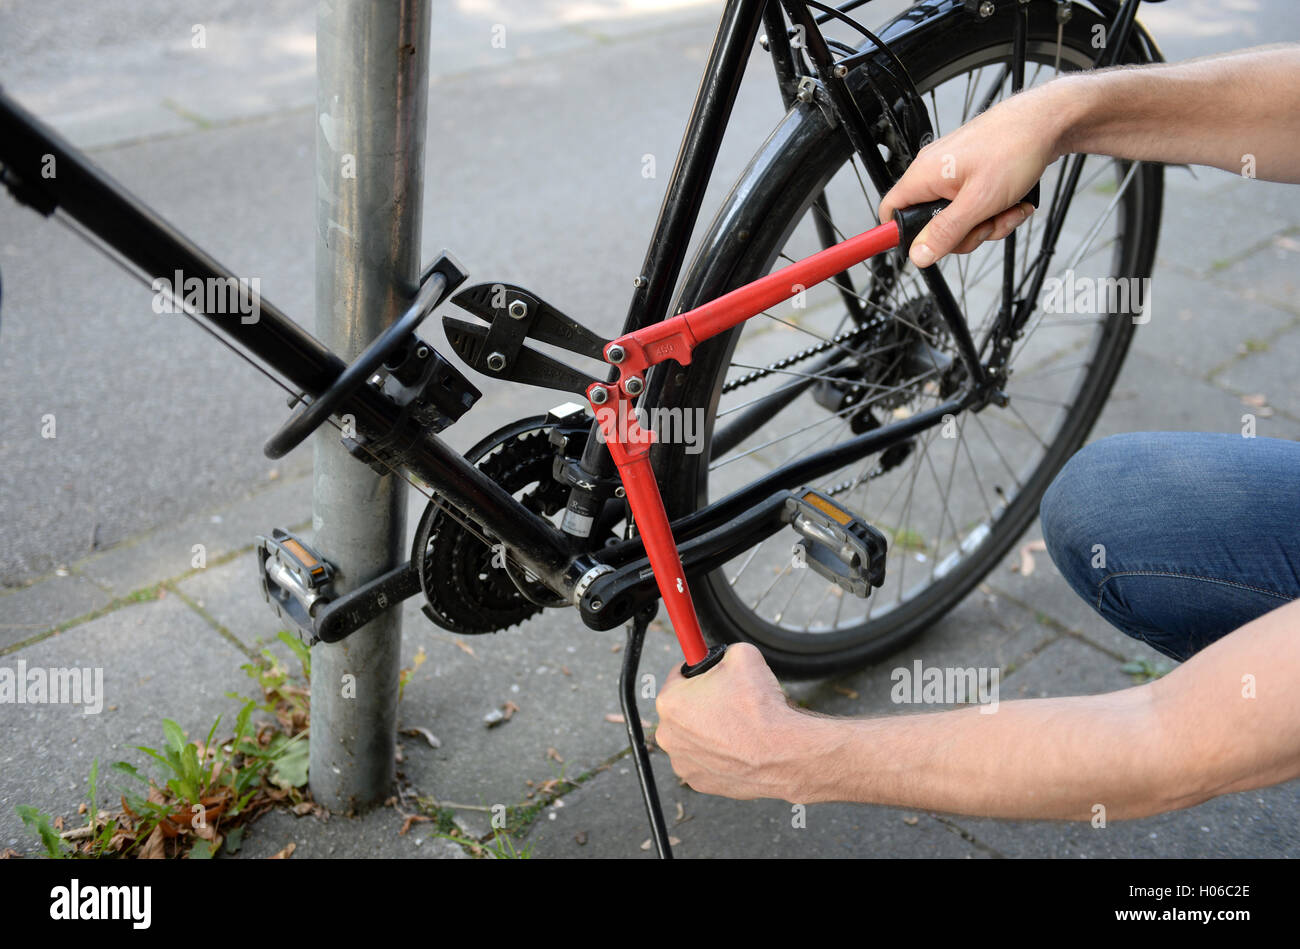 ILLUSTRATION - A man attempts to cut through a bike lock with bolt cutters  in Munich, Germany, 14 September 2016 (staged scene). PHOTO: ANDREAS  GEBERT/DPA Stock Photo - Alamy